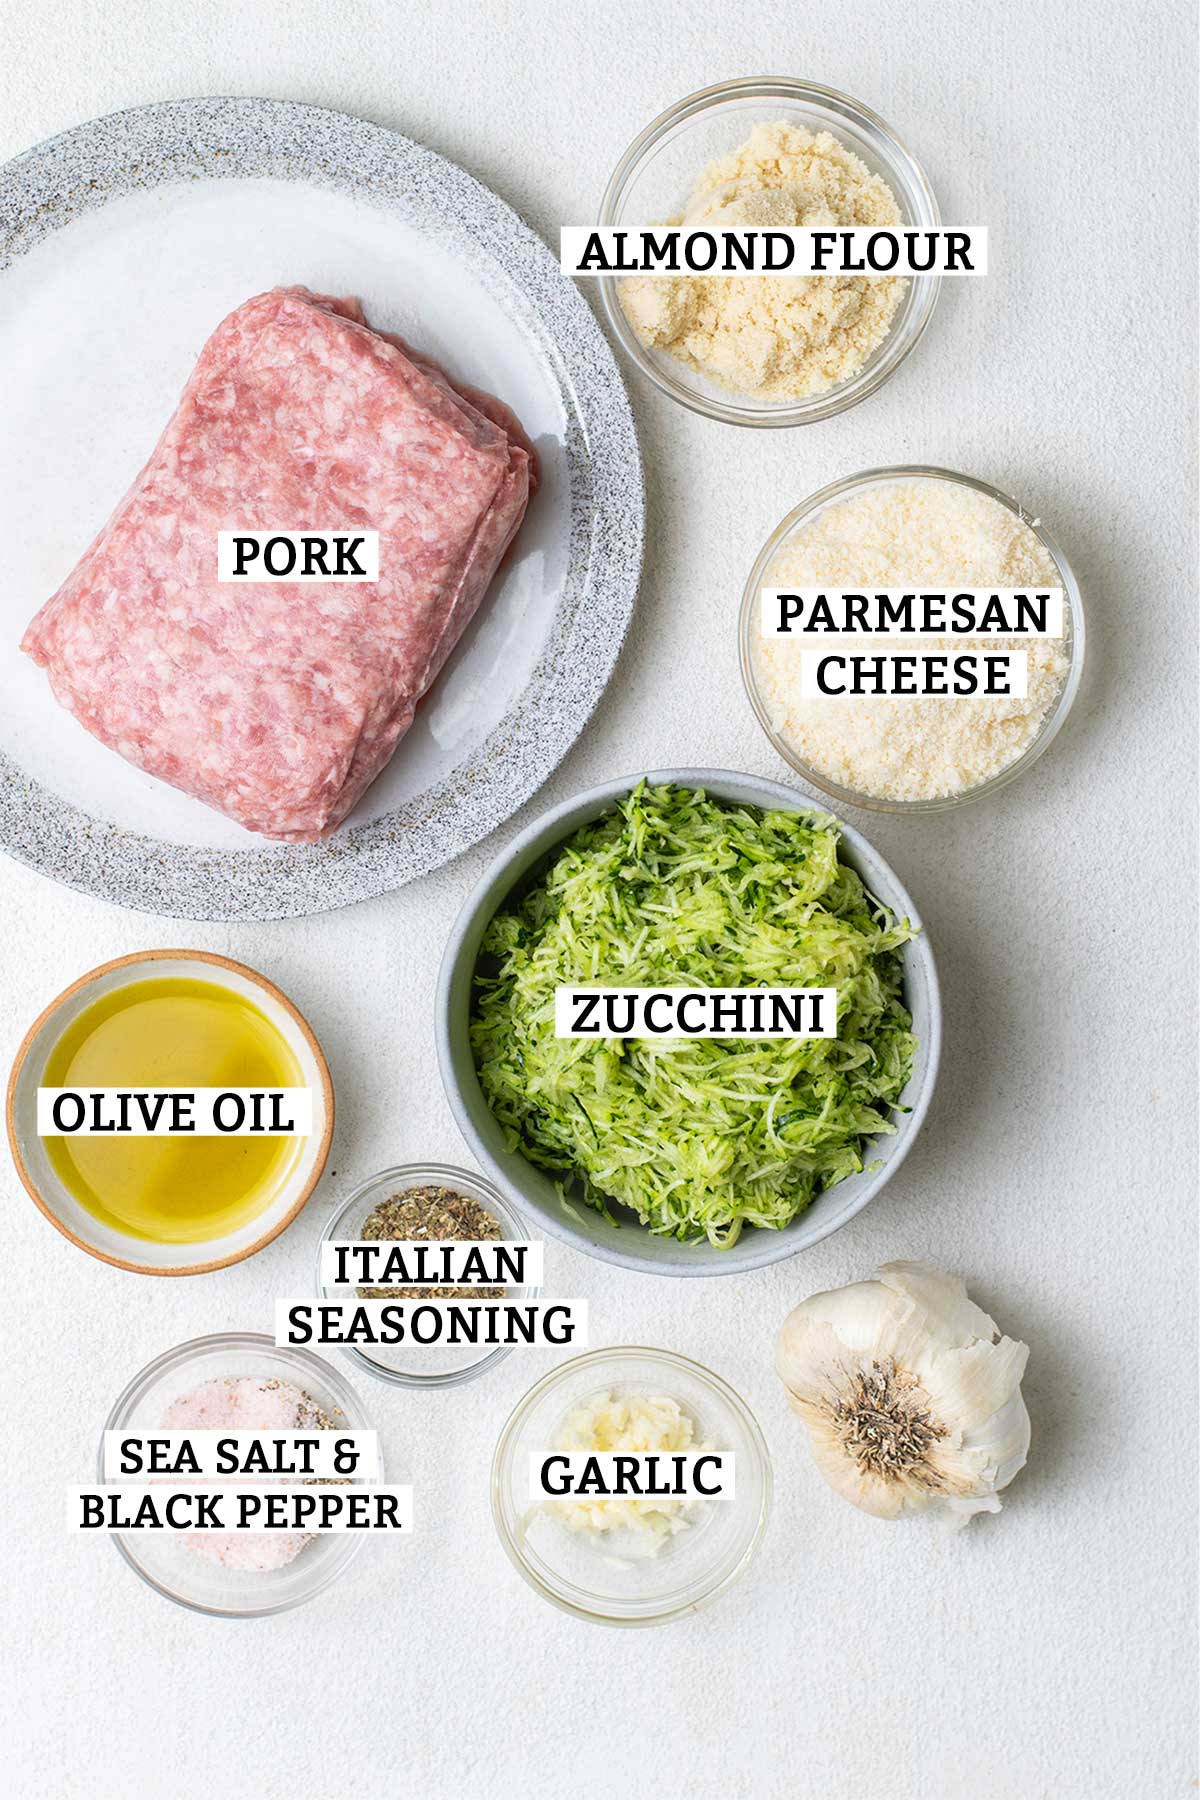 The ingredients needed for keto pork meatballs shown with labels.